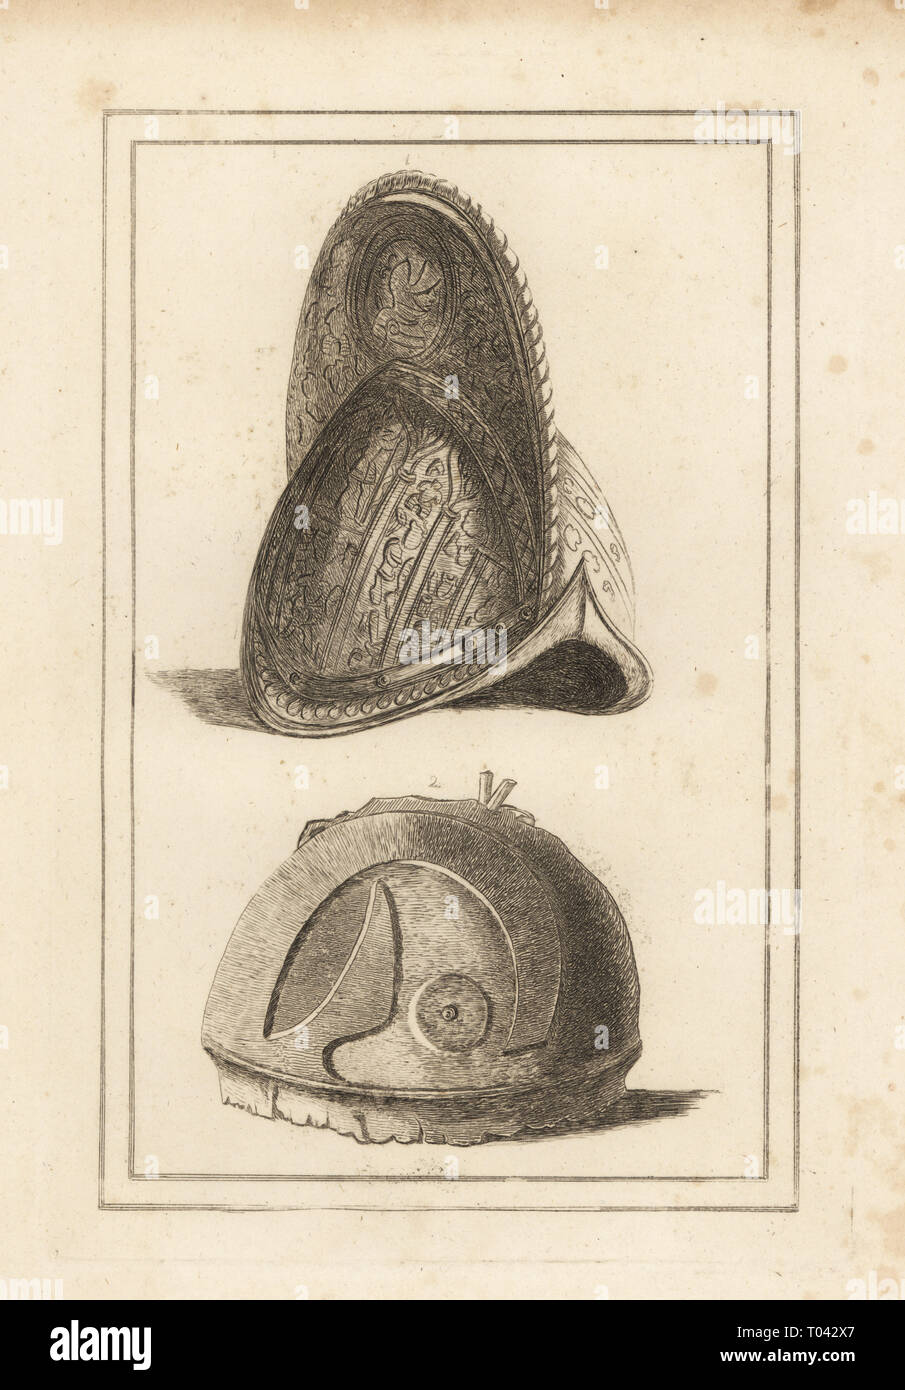 Ancient Venetian morion helmet ornamented with military trophies, and an ancient Roman helmet found at Cannae. Copperplate engraving from Francis Grose's Military Antiquities respecting a History of the English Army, Stockdale, London, 1812. Stock Photo